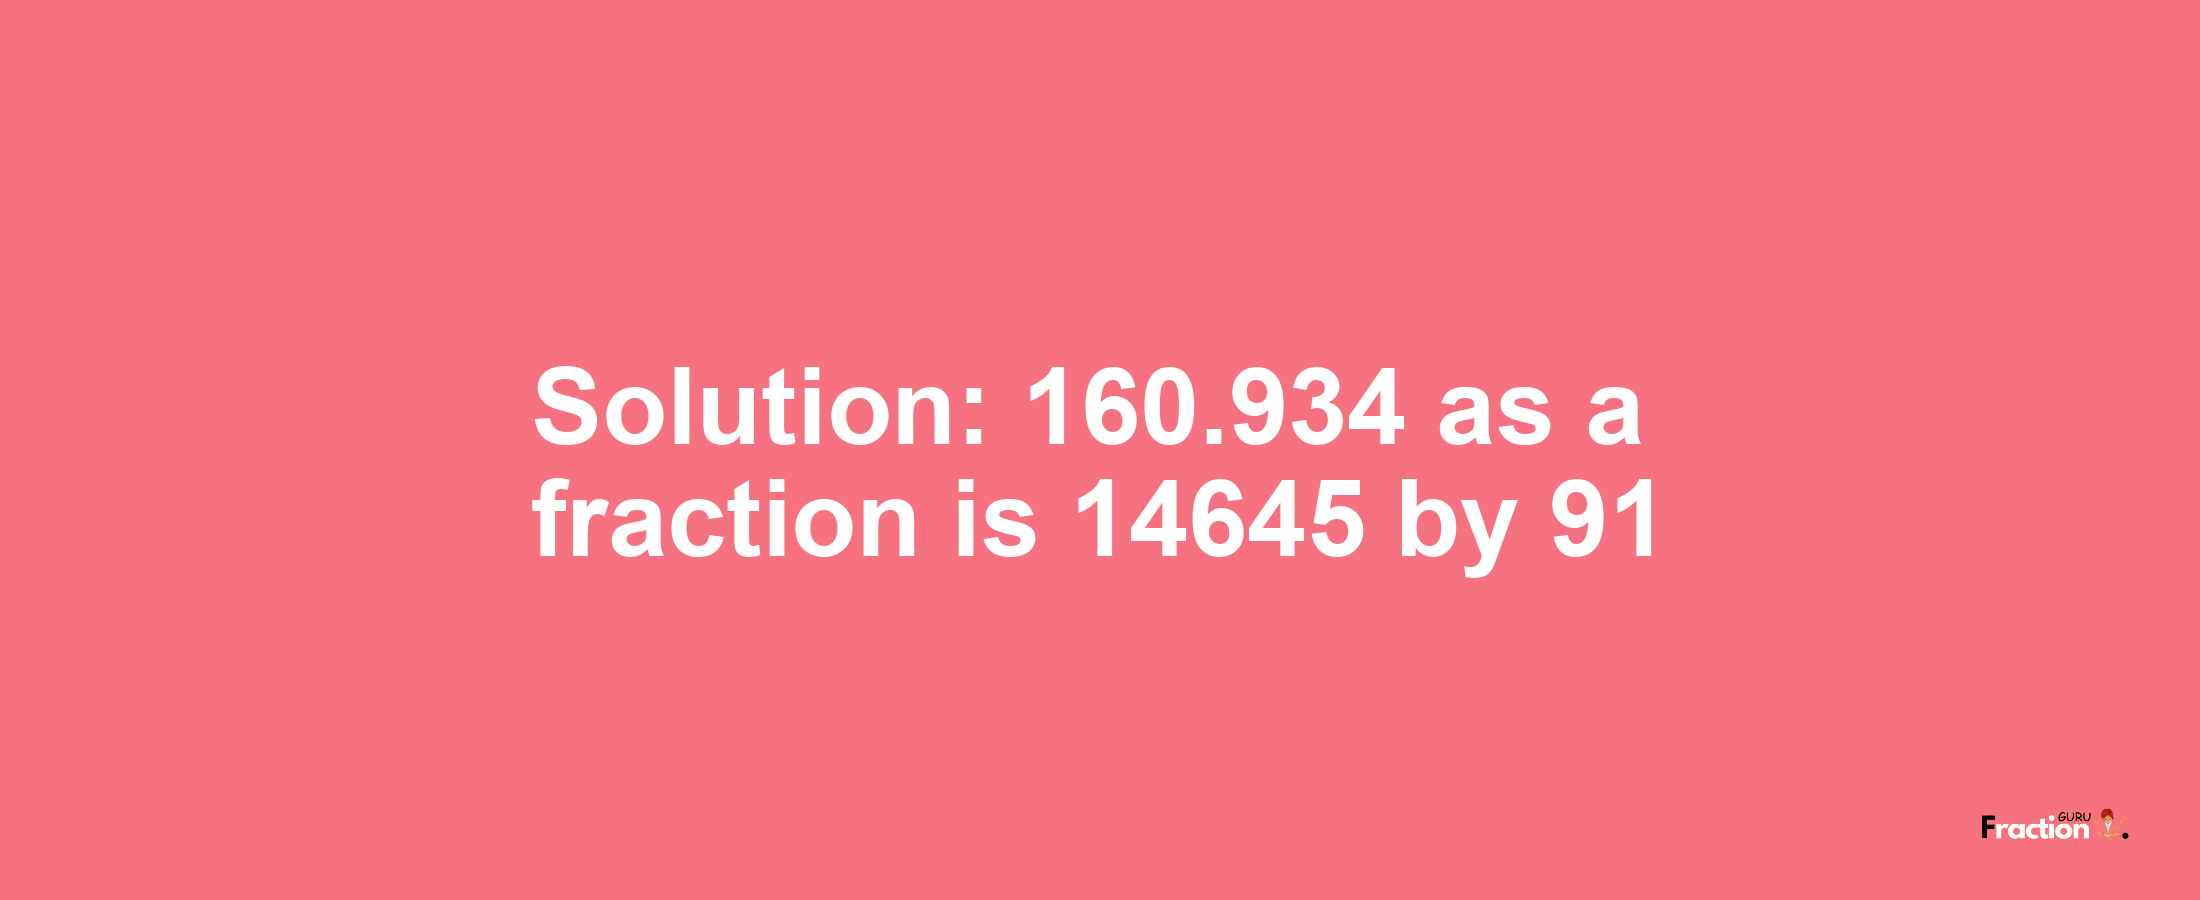 Solution:160.934 as a fraction is 14645/91